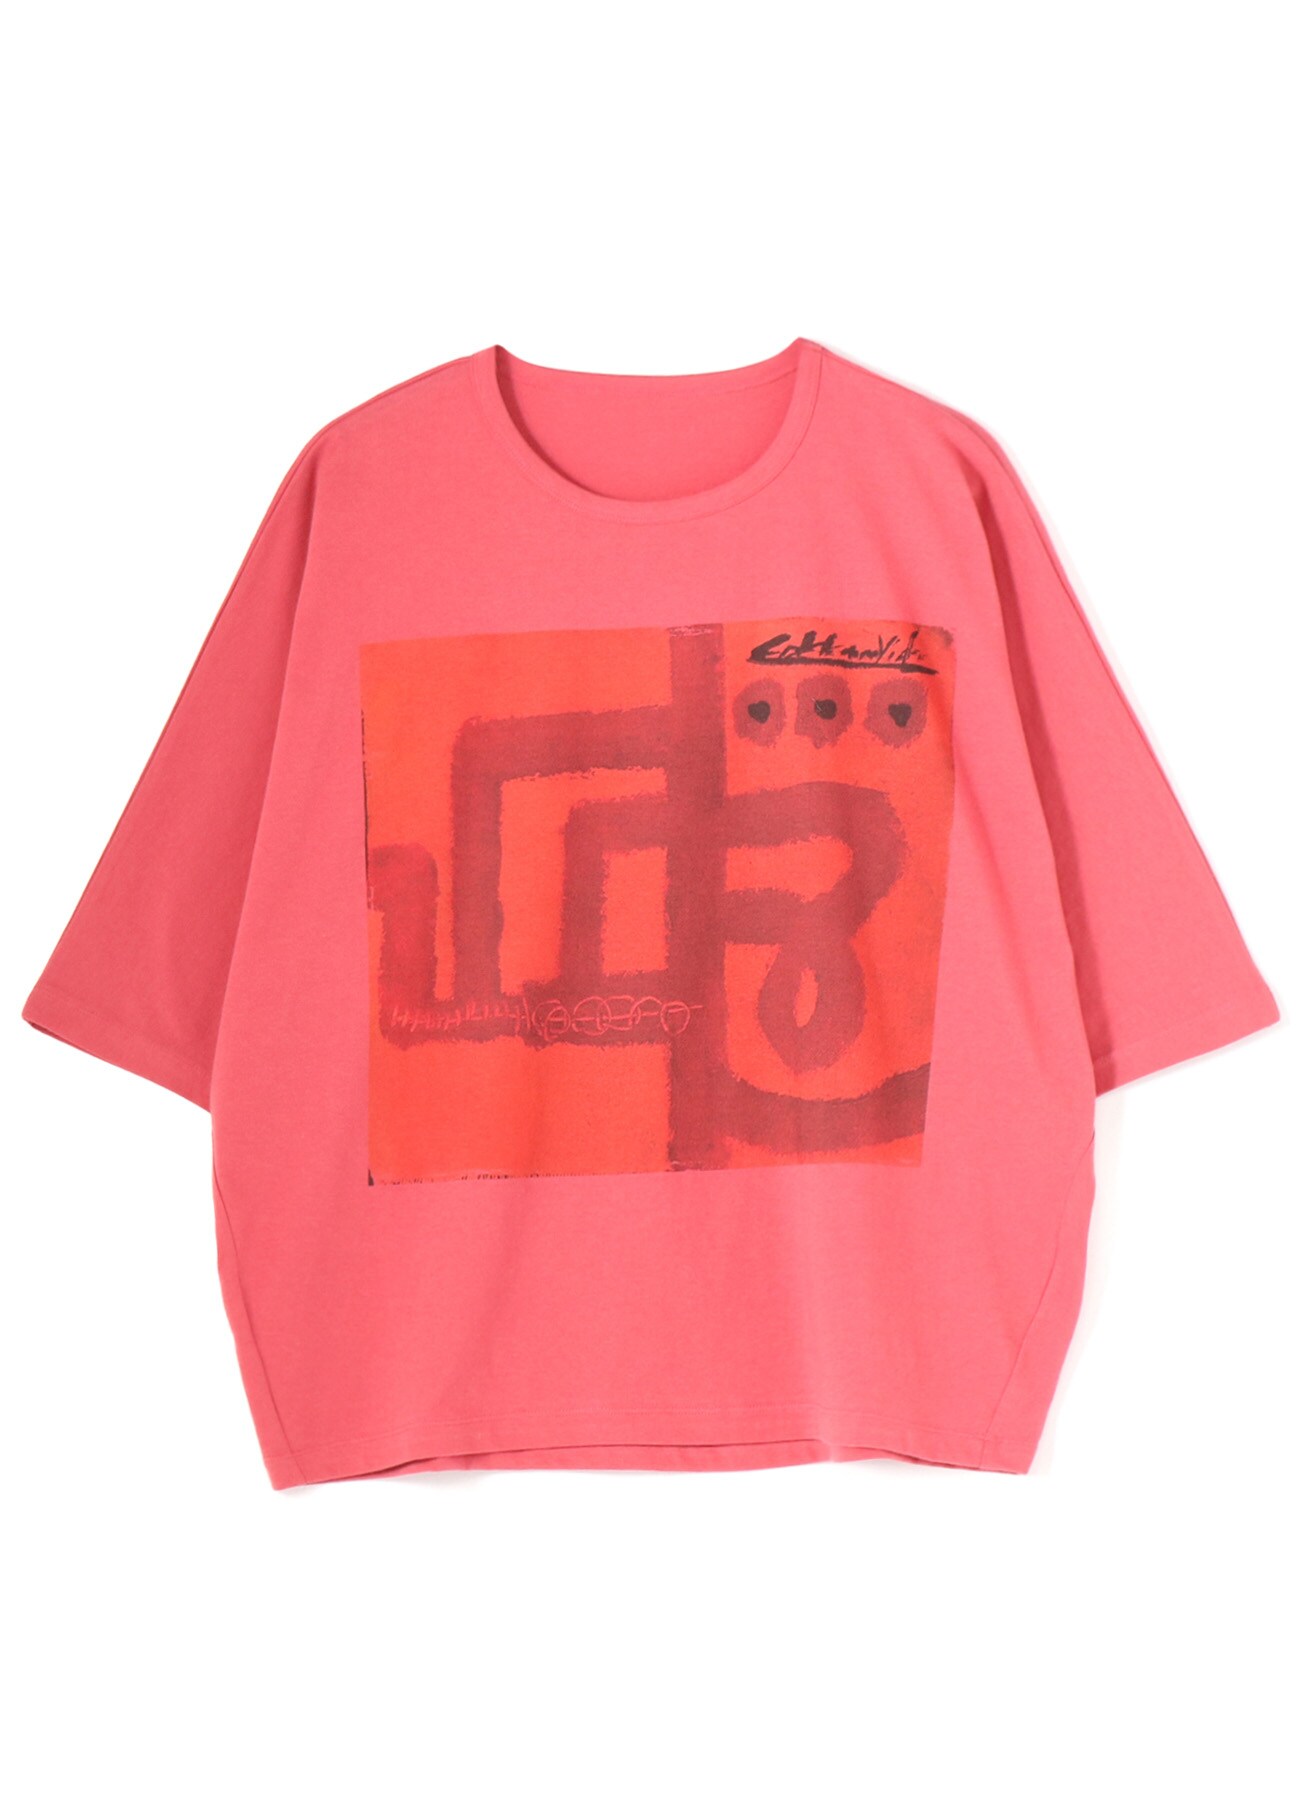 Y's for living x Cokkun Vich / SOFT COTTON JERSEY "ROAD" PRINT WIDE SHIRT